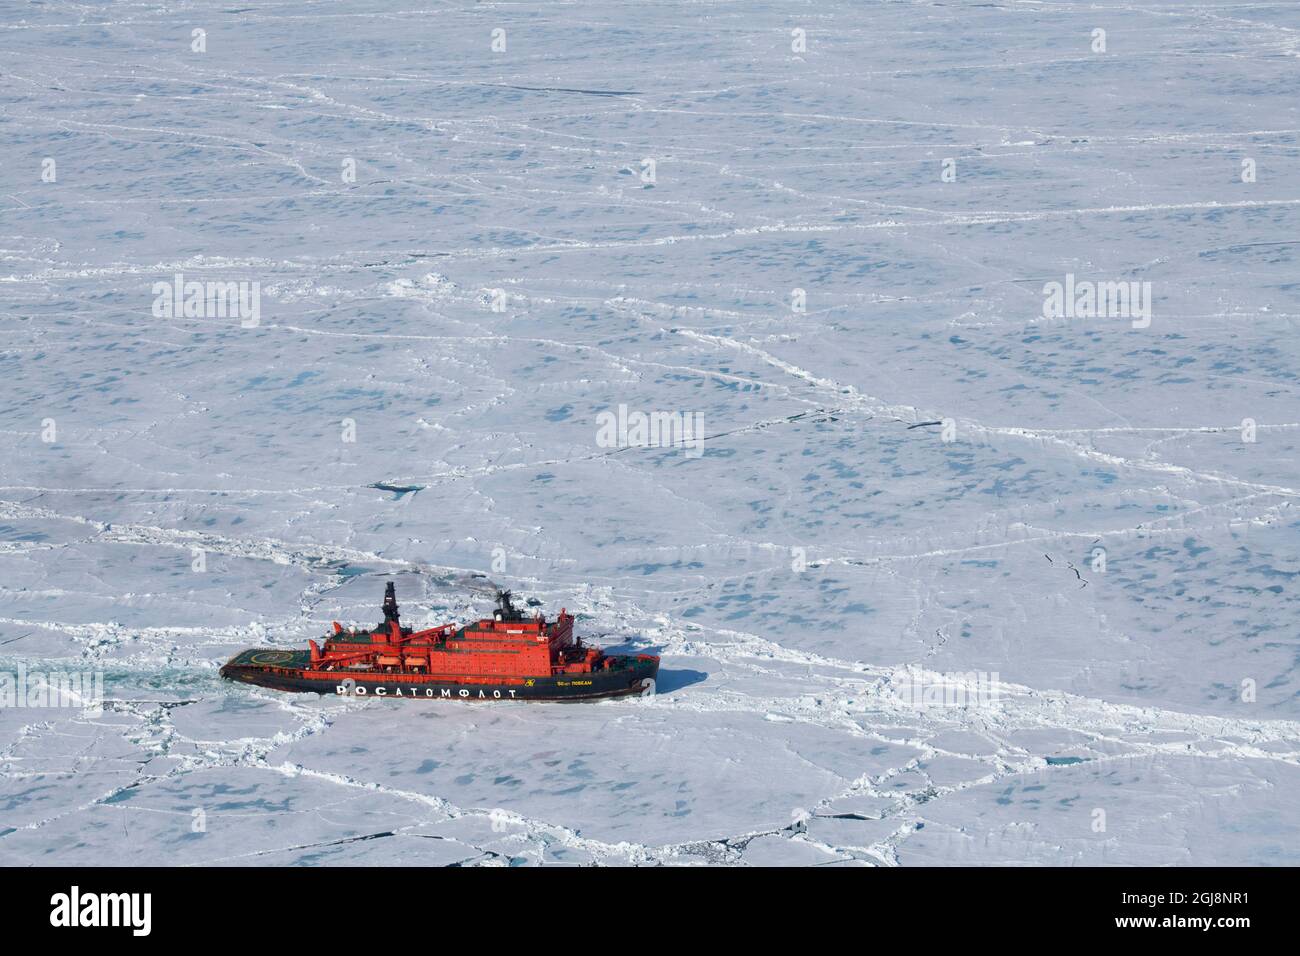 Russia. Aerial view of Russian nuclear icebreaker, 50 Years of Victory. Breaking through pack ice in High Arctic at 85.6 degrees north on the way to t Stock Photo